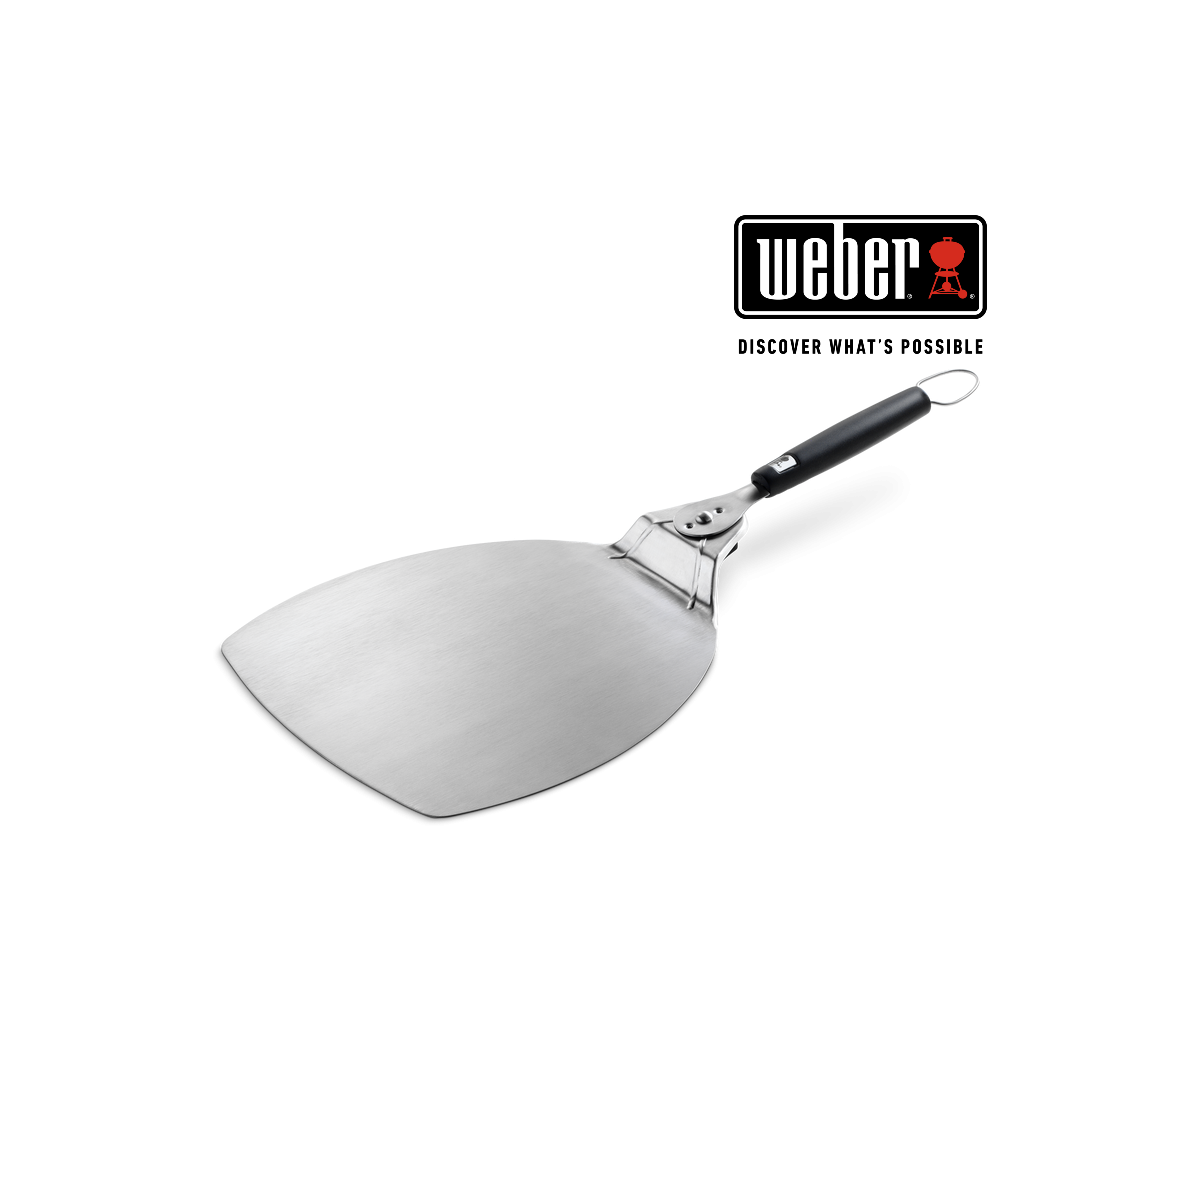 WEBER PIZZA PADDLE - STAINLESS STEEL PADDLE, HANDLE ROTATES FOR COMPACT STORAGE 32x66cm, 6691